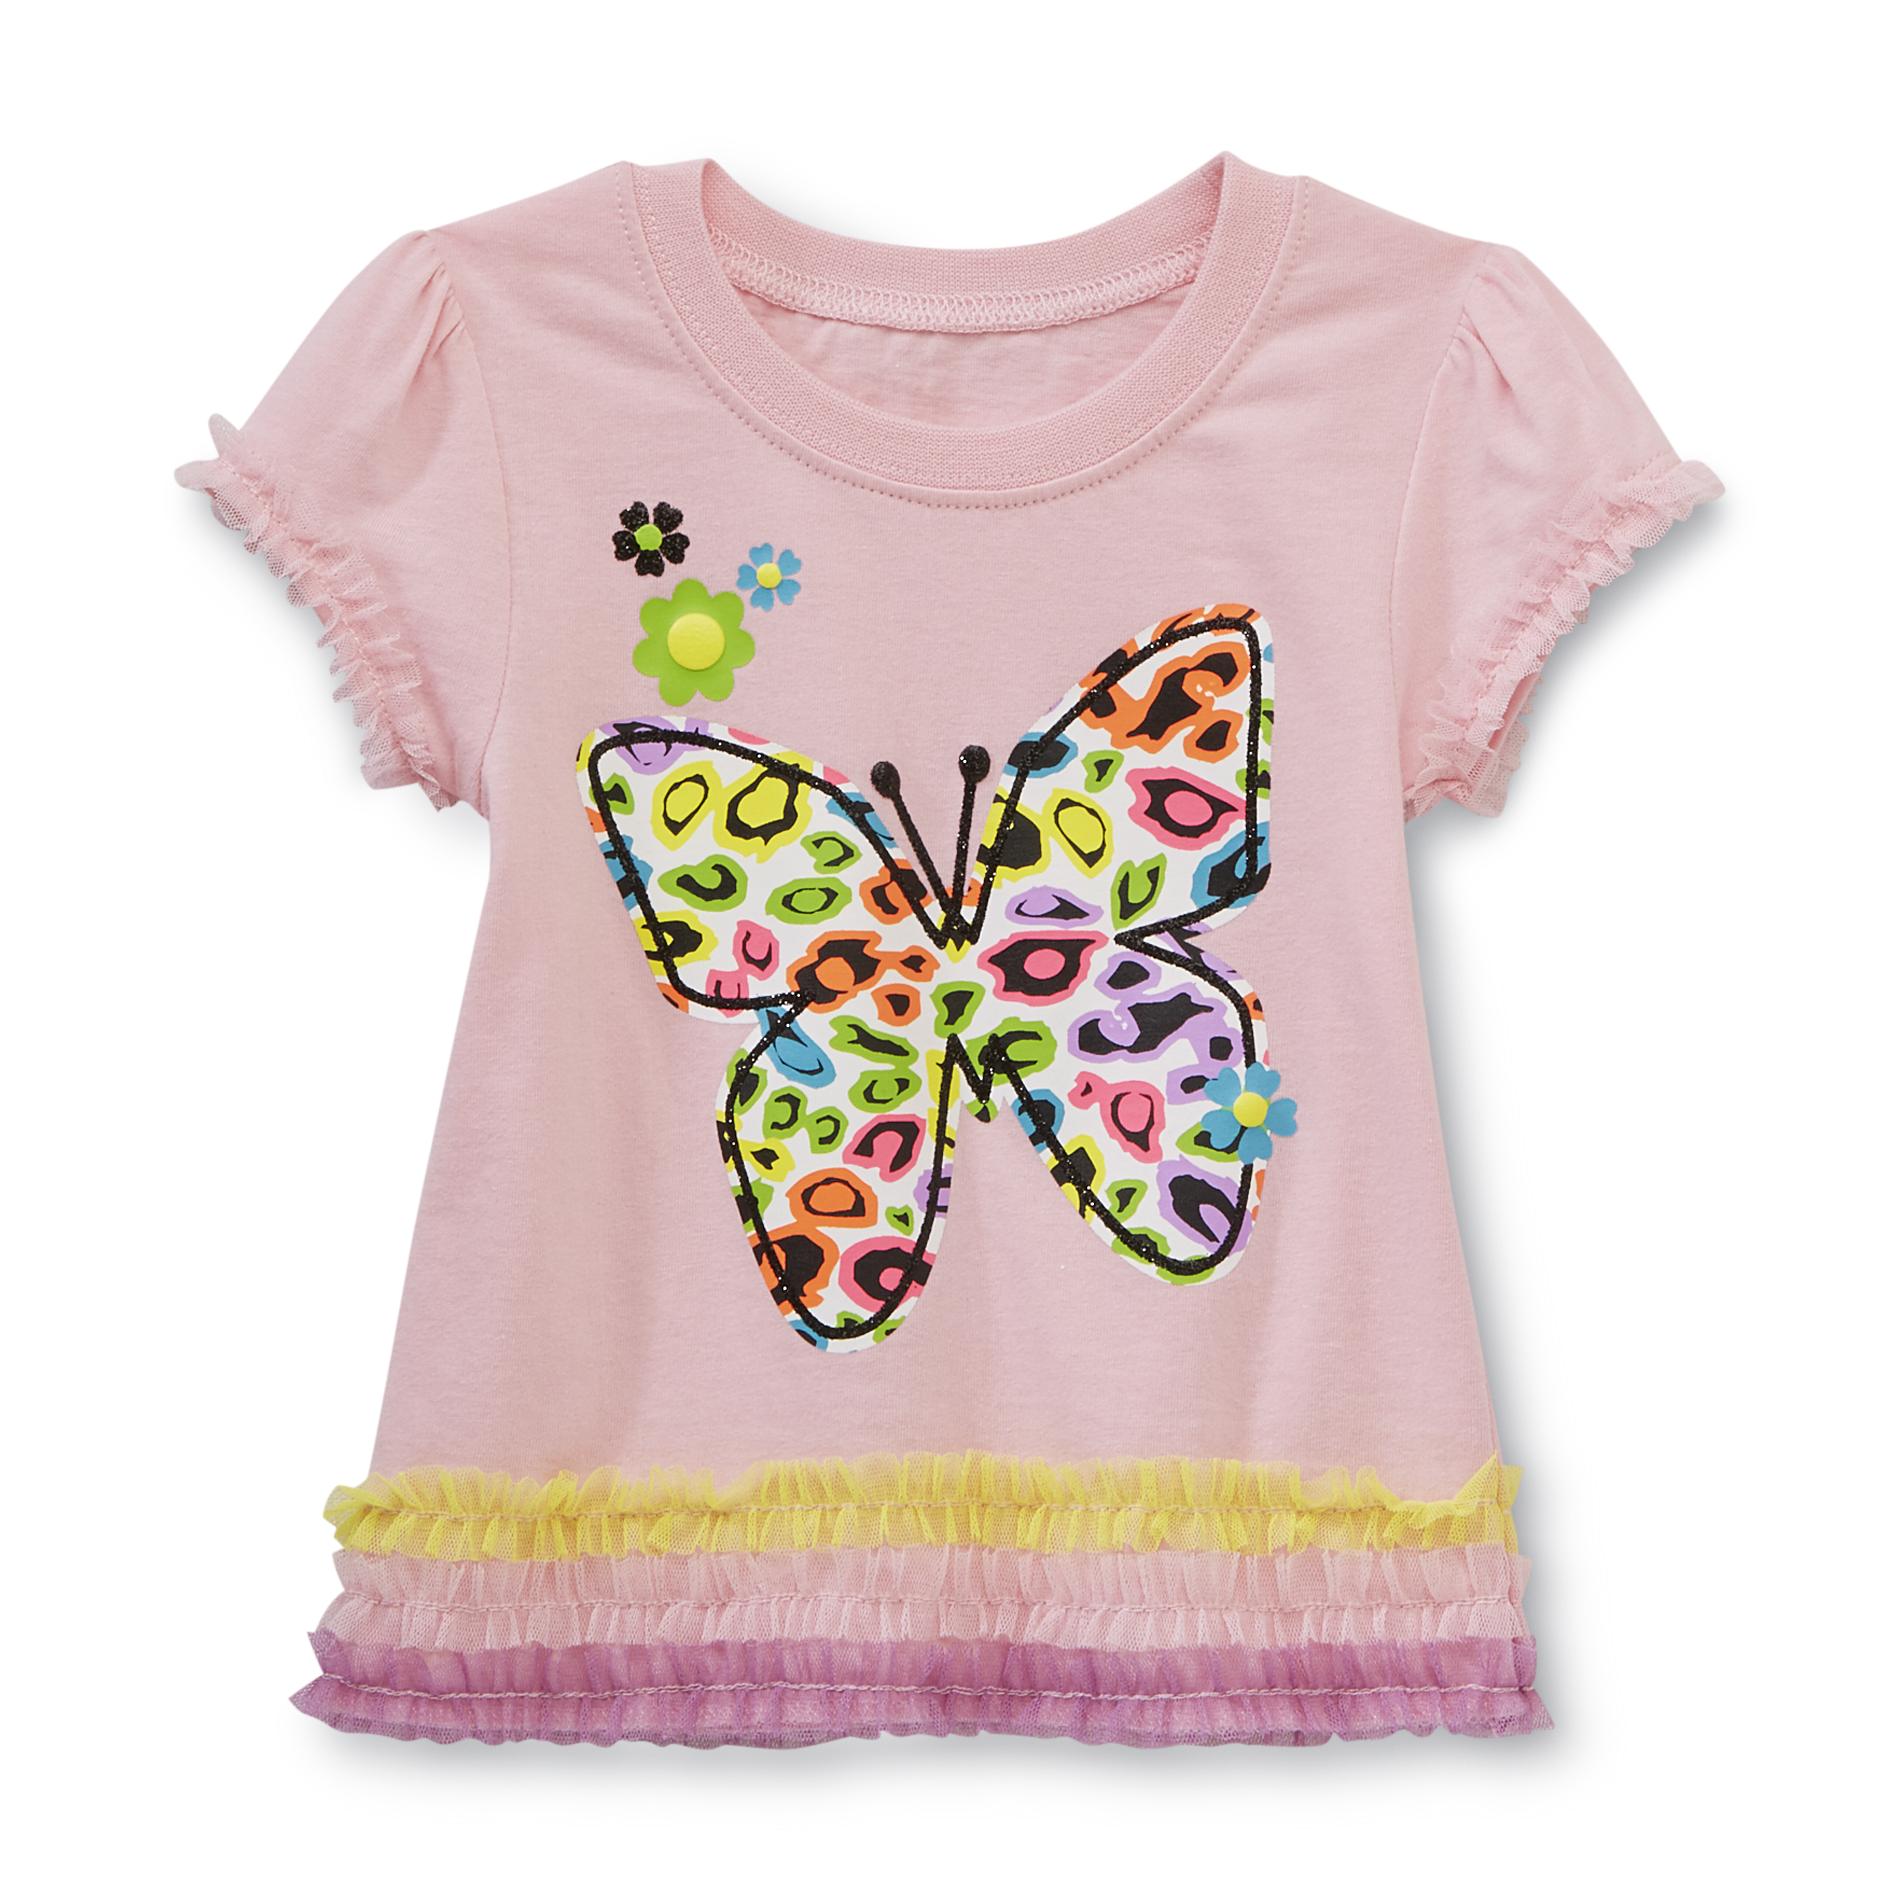 Piper Infant & Toddler Girl's Tulle Ruffle Top - Neon Leopard Butterfly